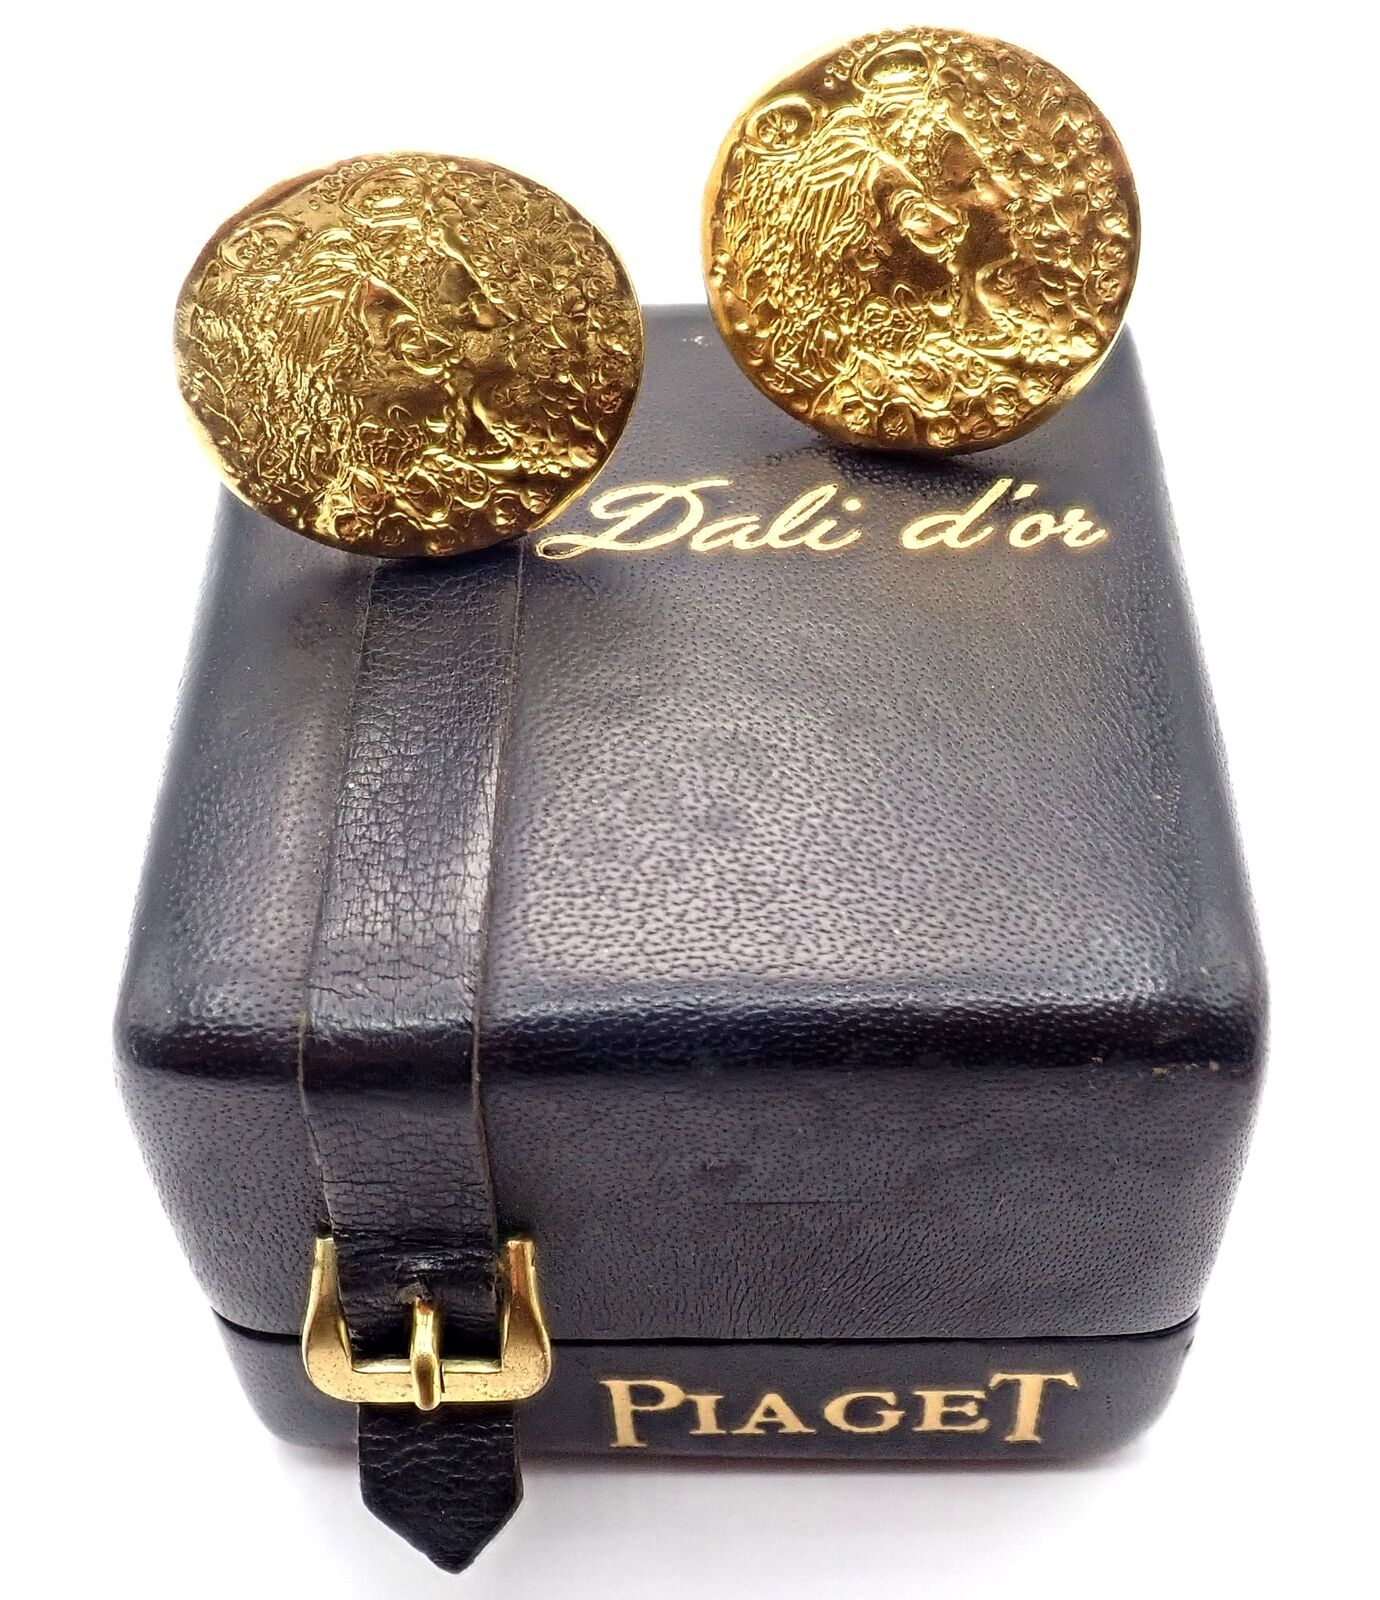 Salvador Dali for Piaget Jewelry & Watches:Men's Jewelry:Cufflinks Authentic Salvador Dali D'or for Piaget 18k & 22k Yellow Gold Cufflinks Box 1966